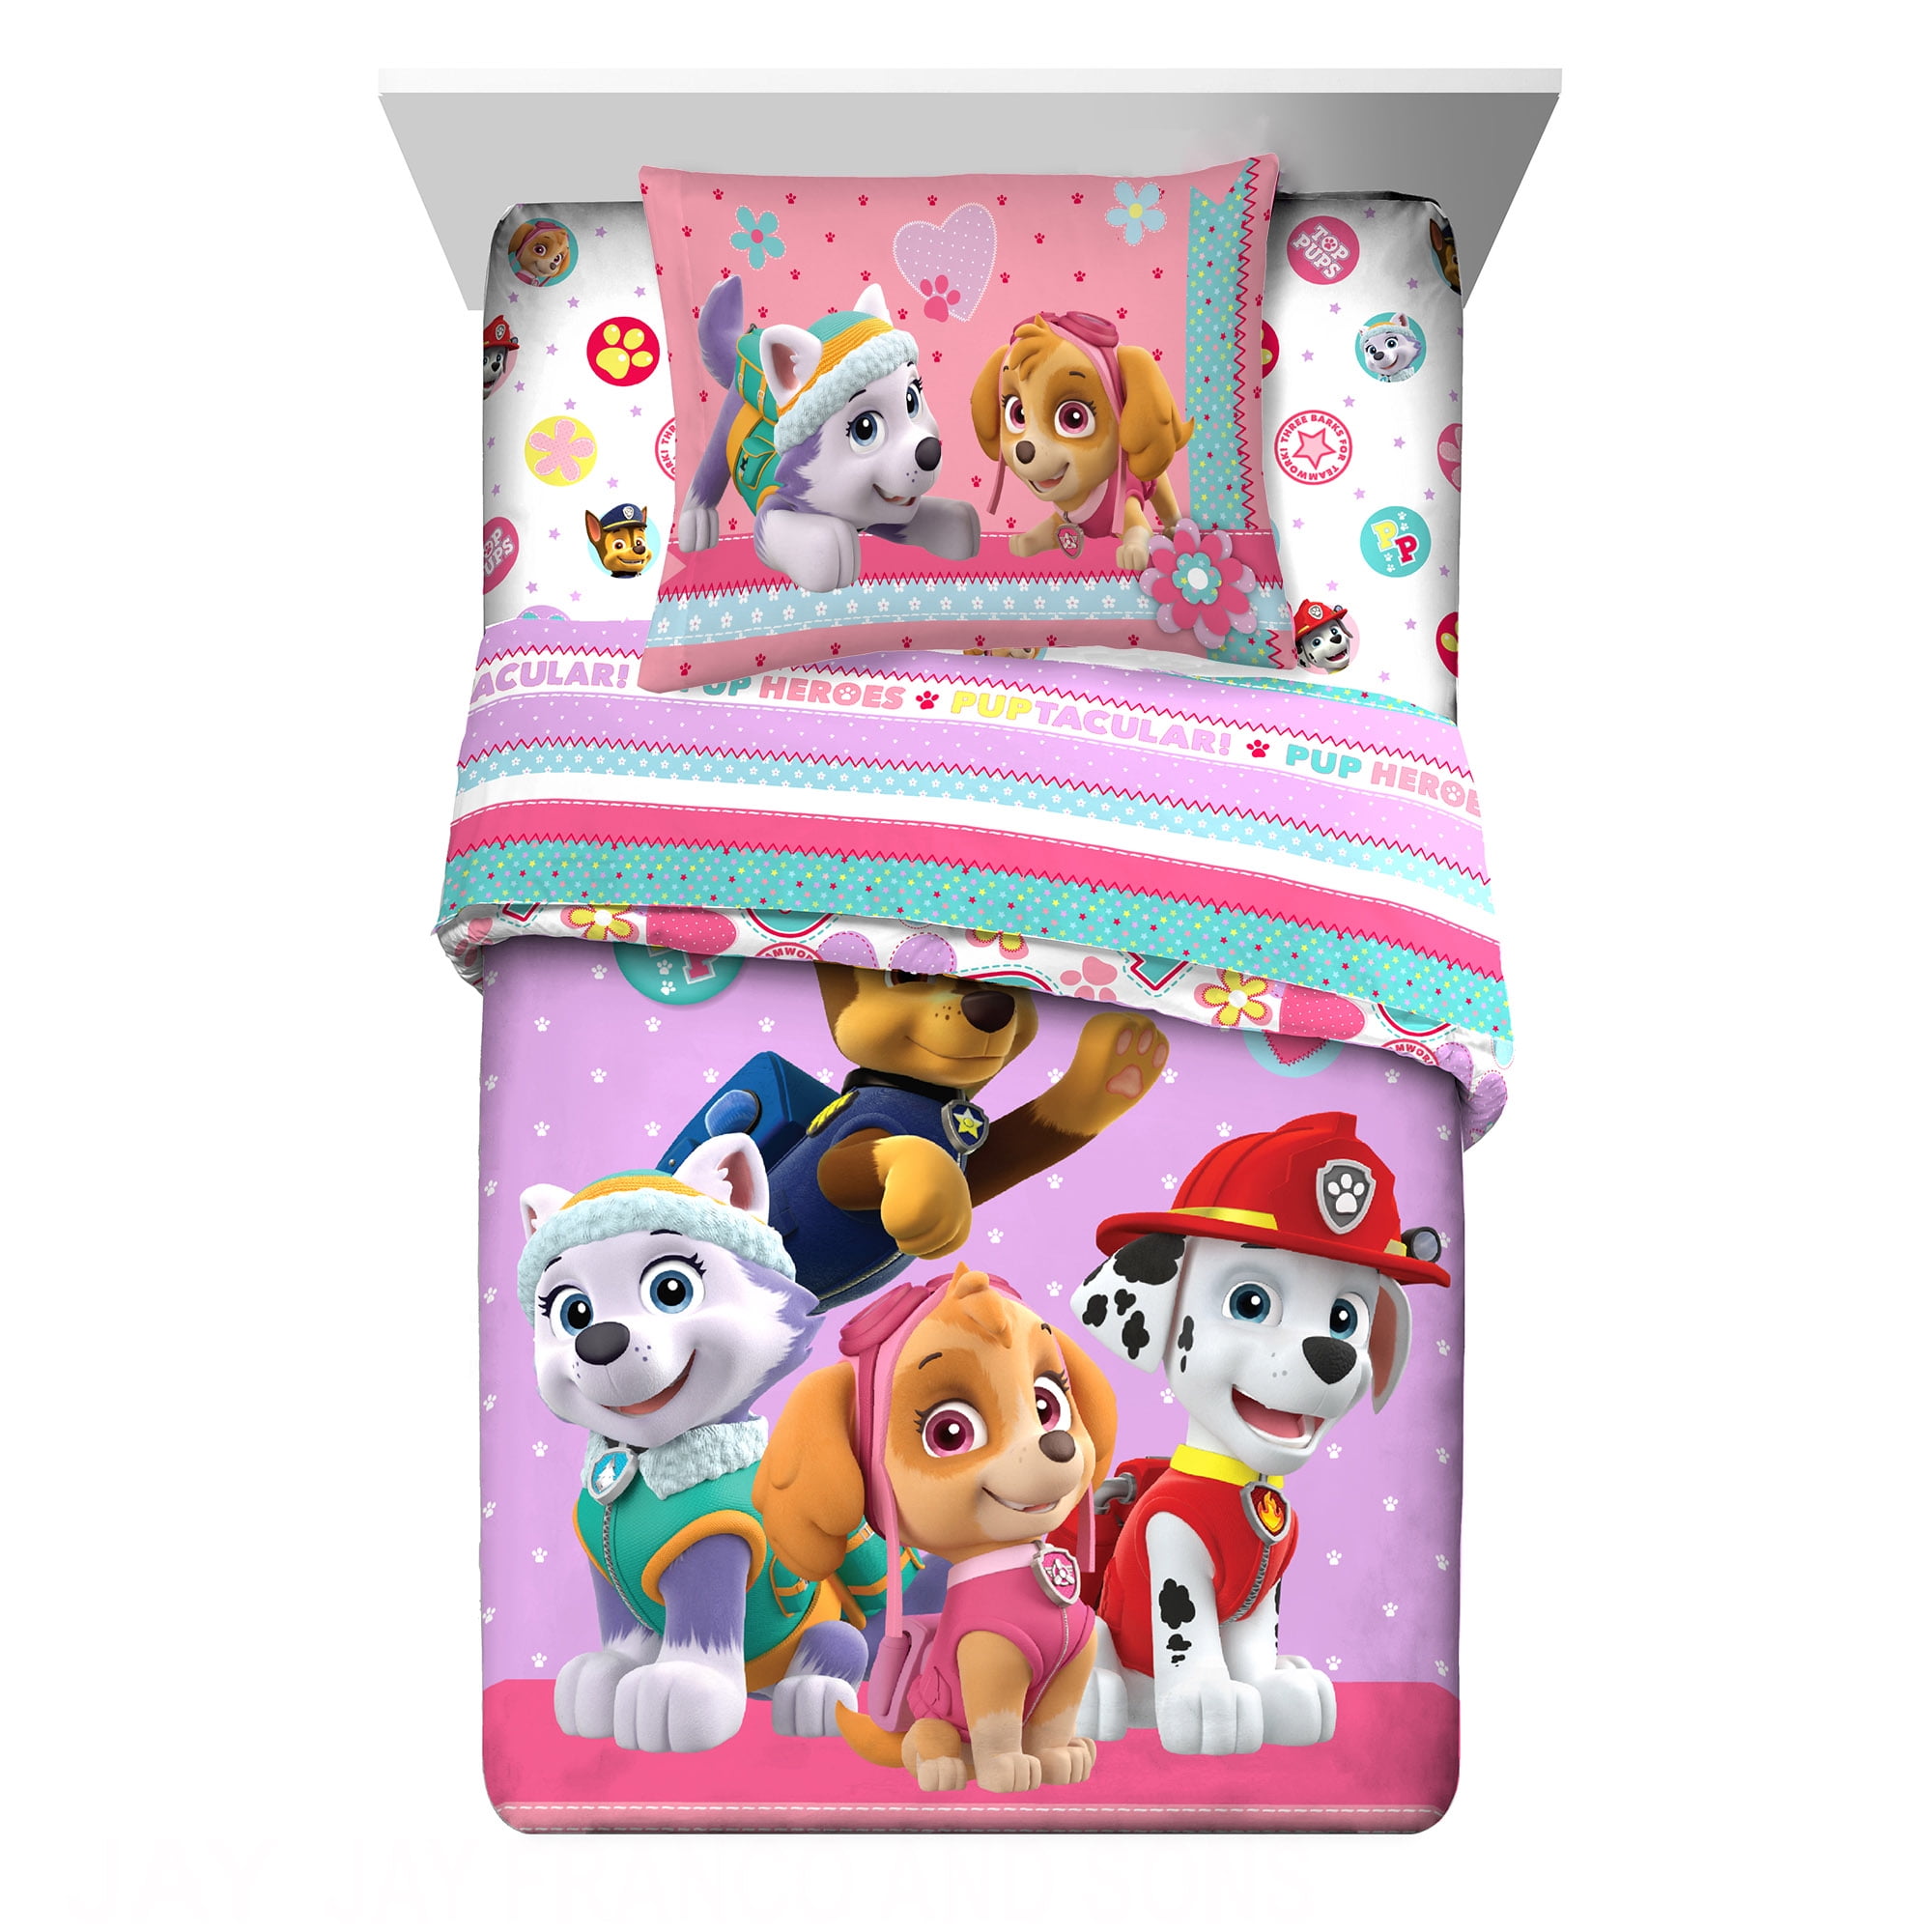 Paw Patrol NEW "DINO" Duvet Cover Bedding Set Single Size FOR BOYS AND GIRLS 